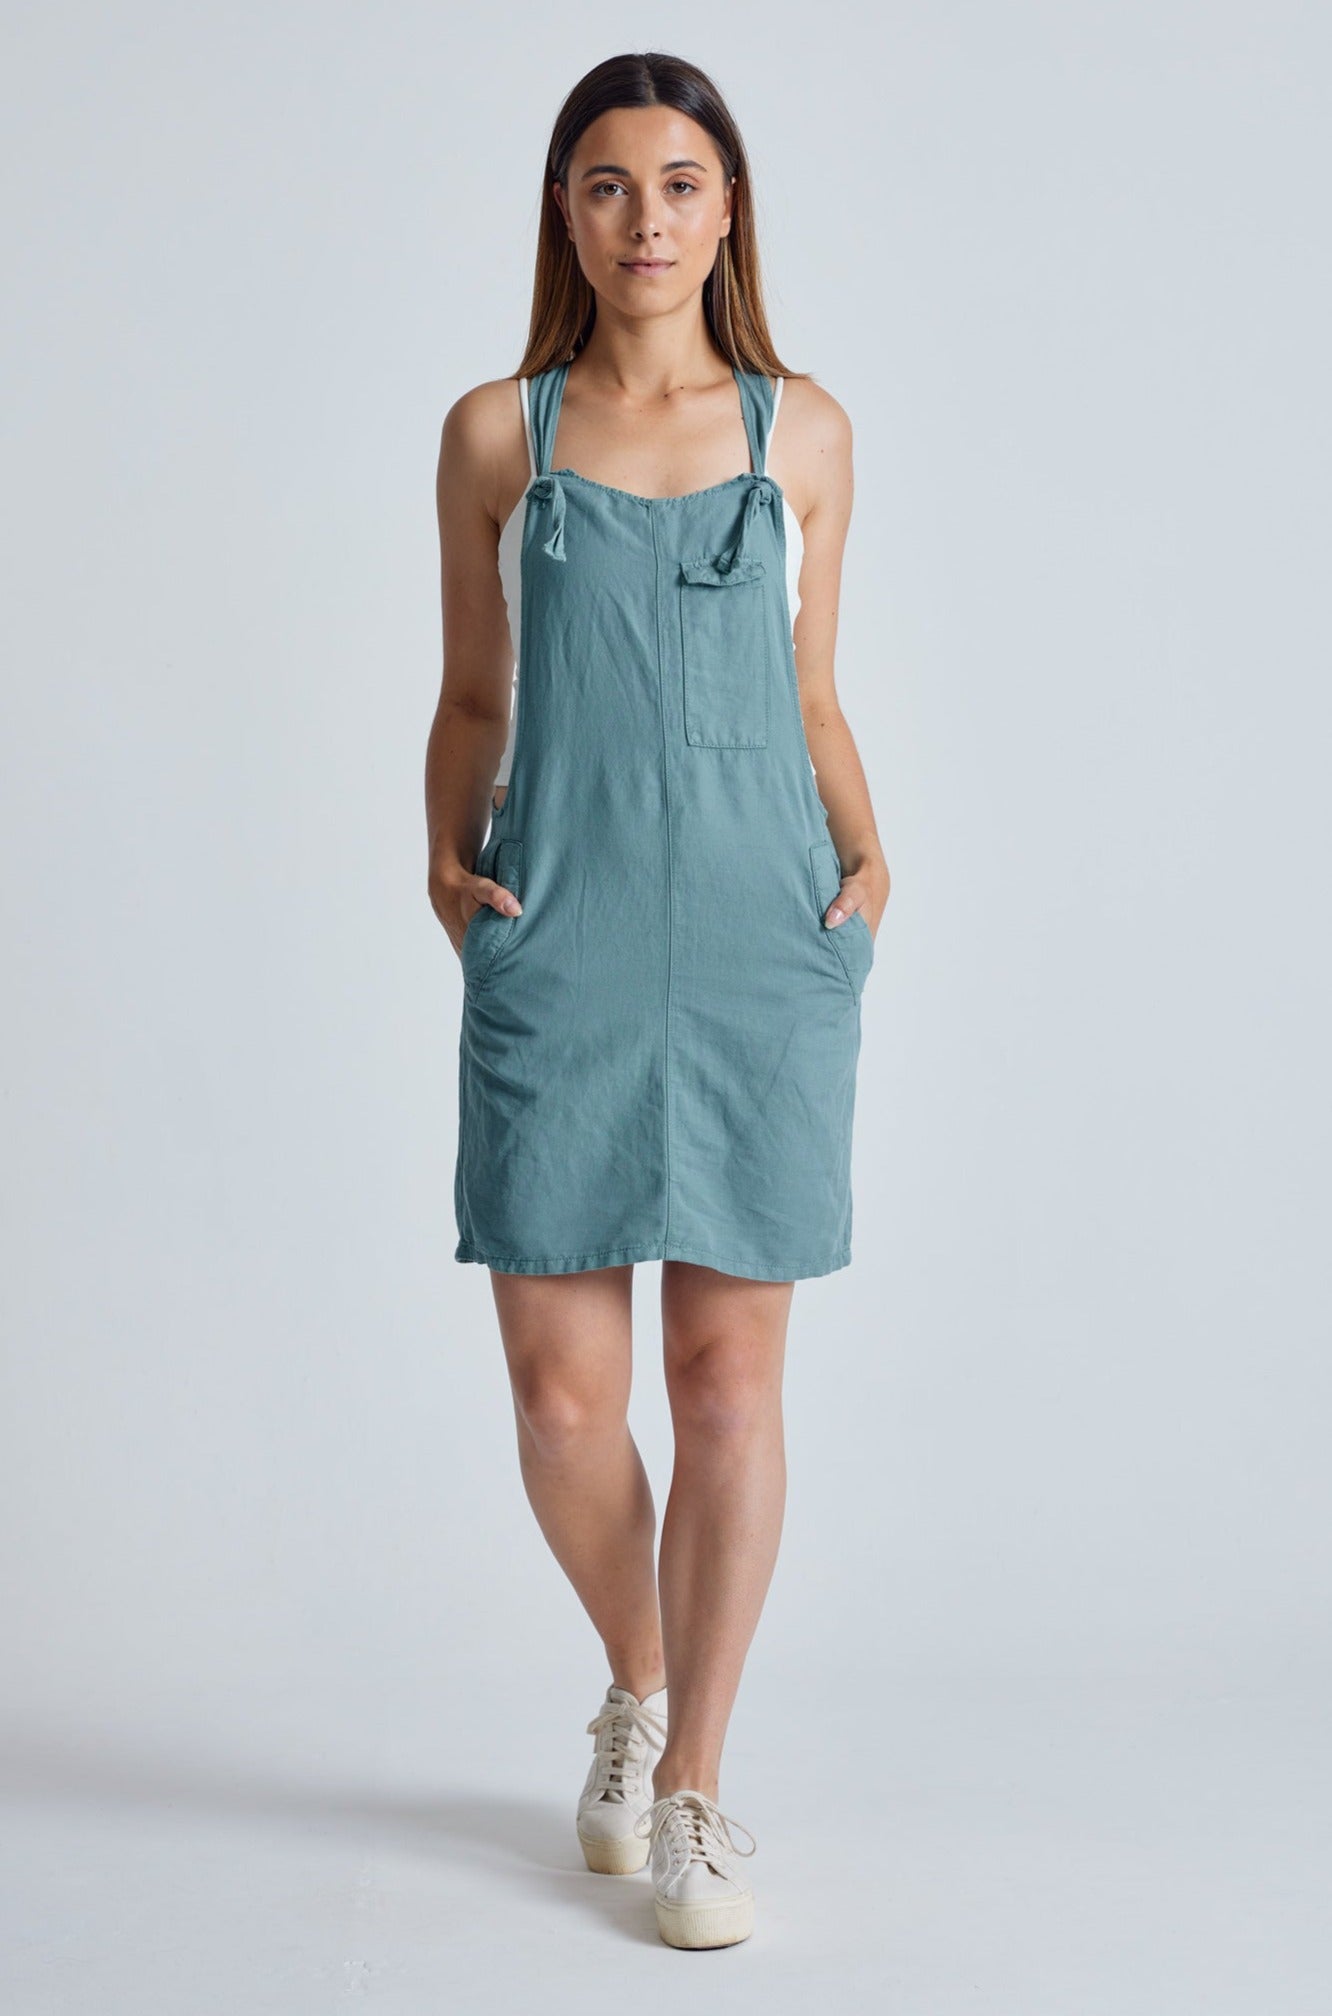 Retro-Blue Peggy Pocket Dungaree Dress - GOTS Certified Organic Cotton and Linen